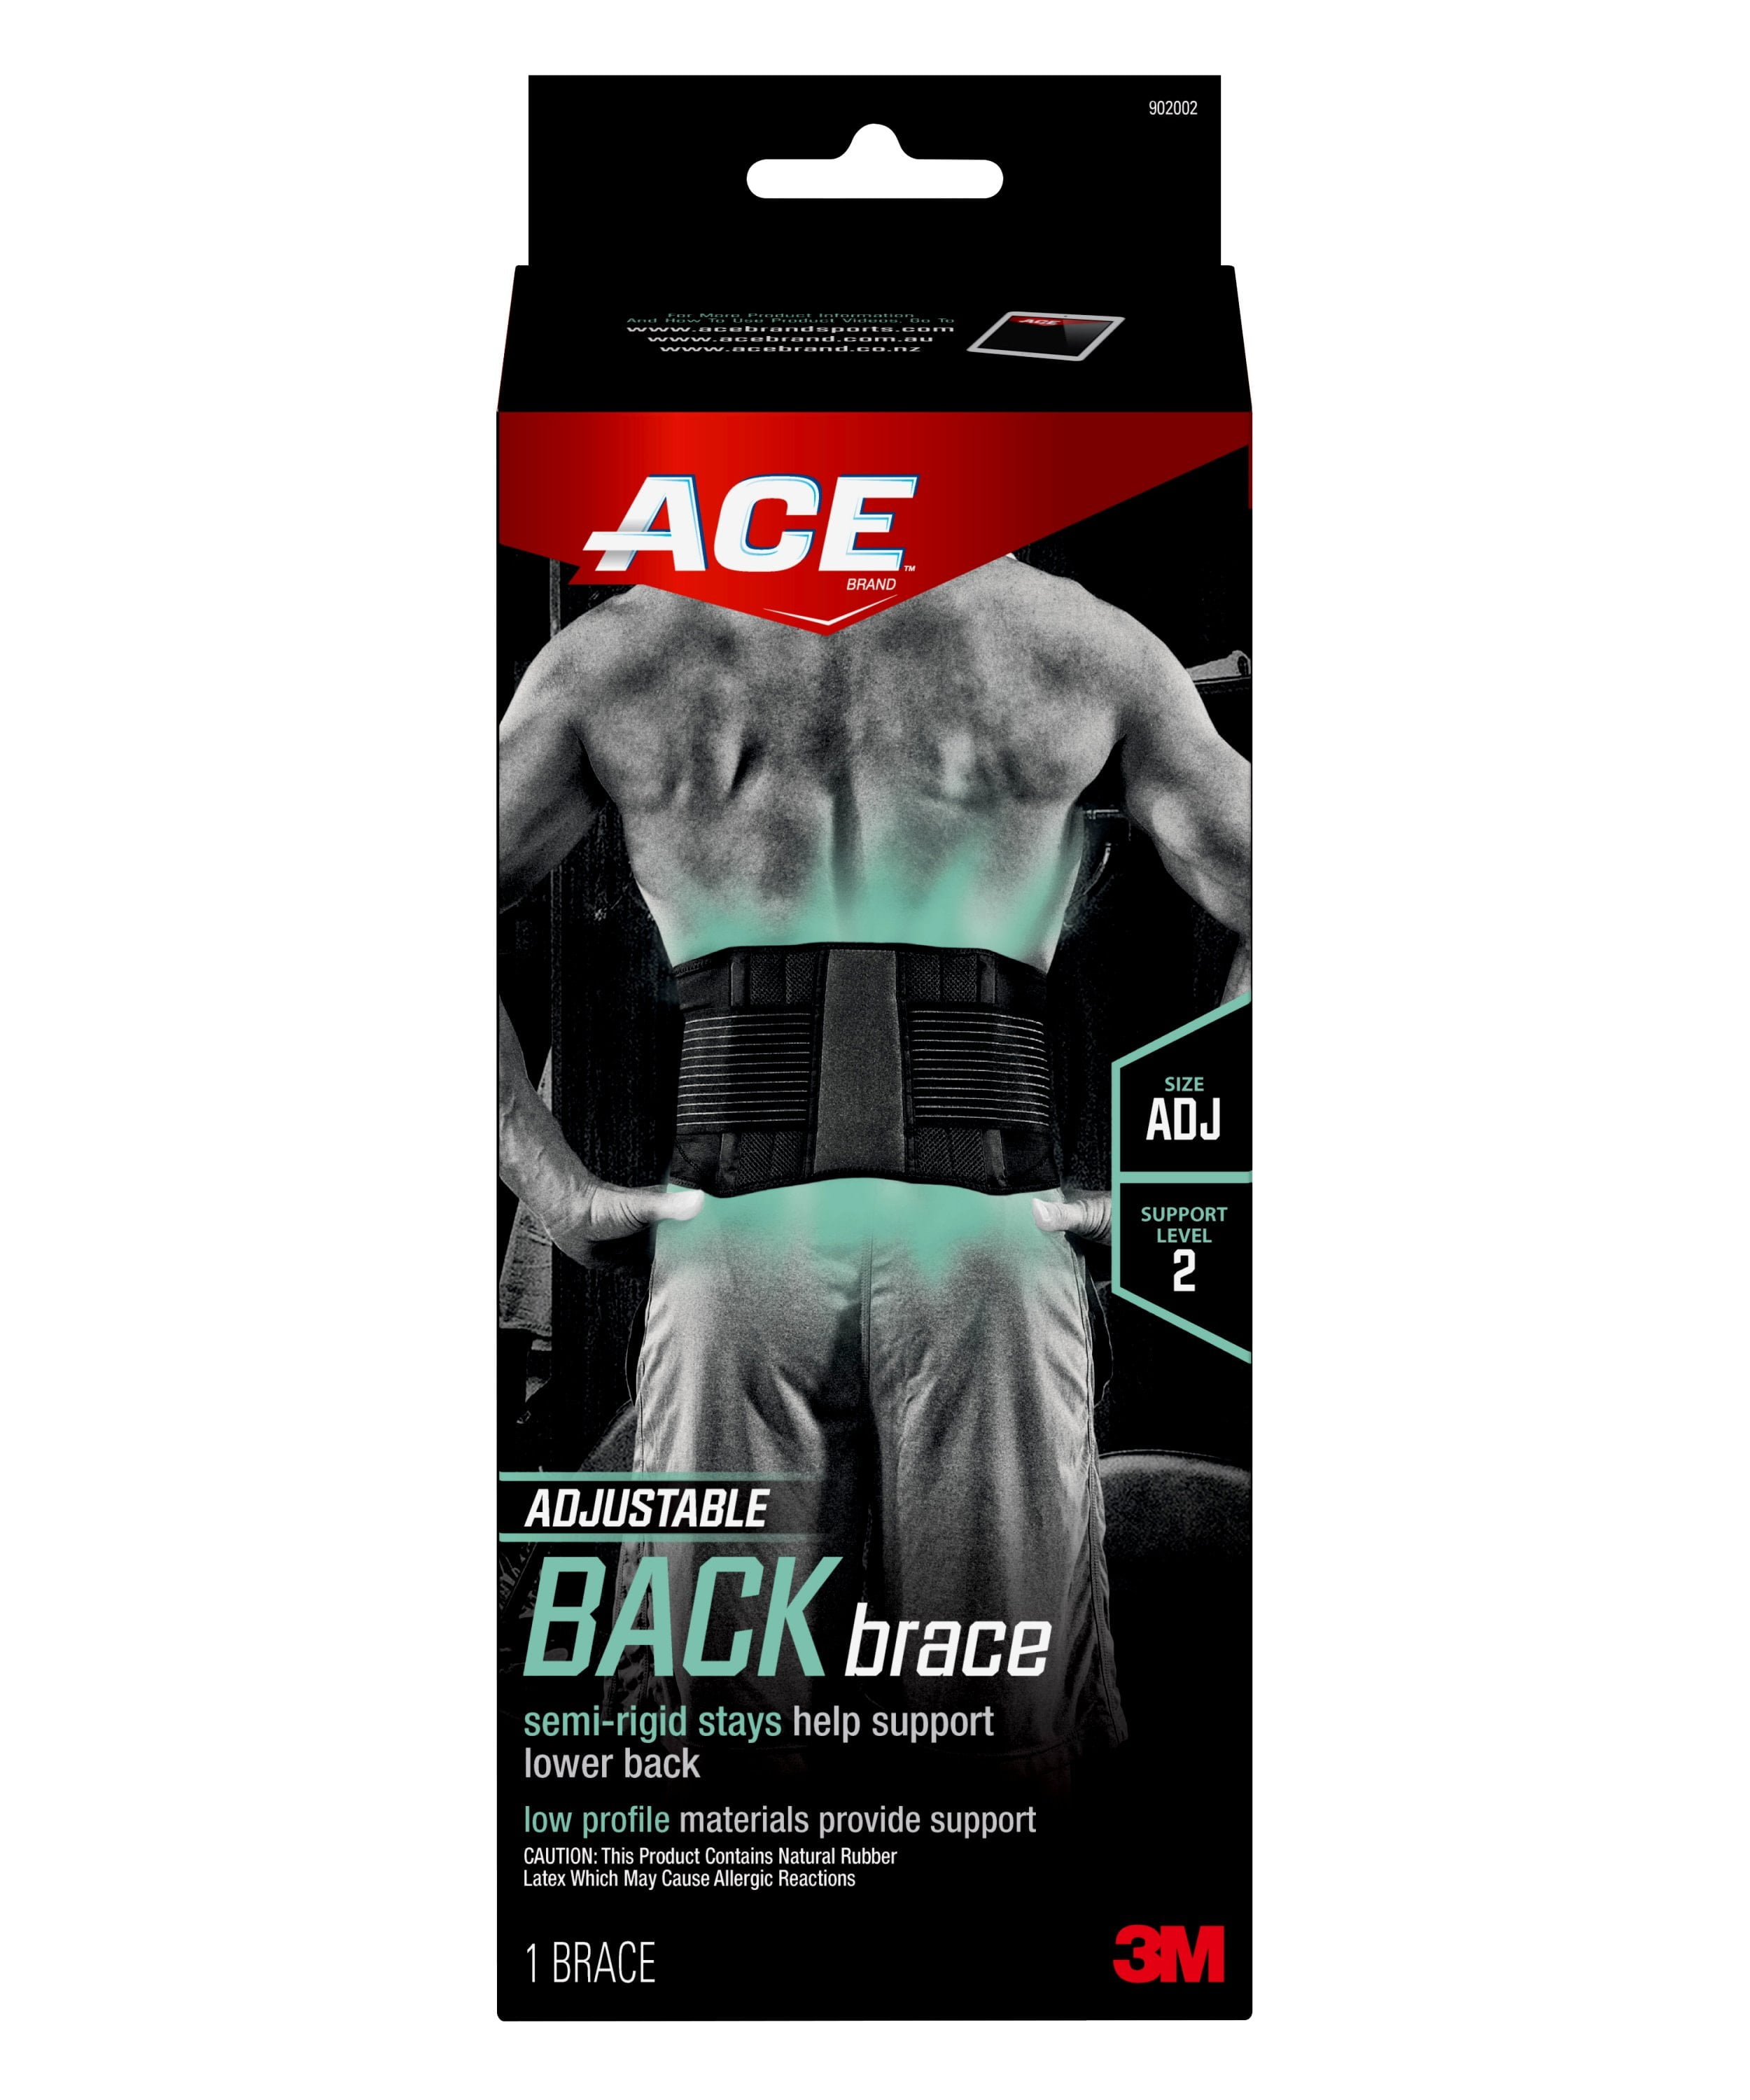 Back Braces for sale in New Orleans, Louisiana